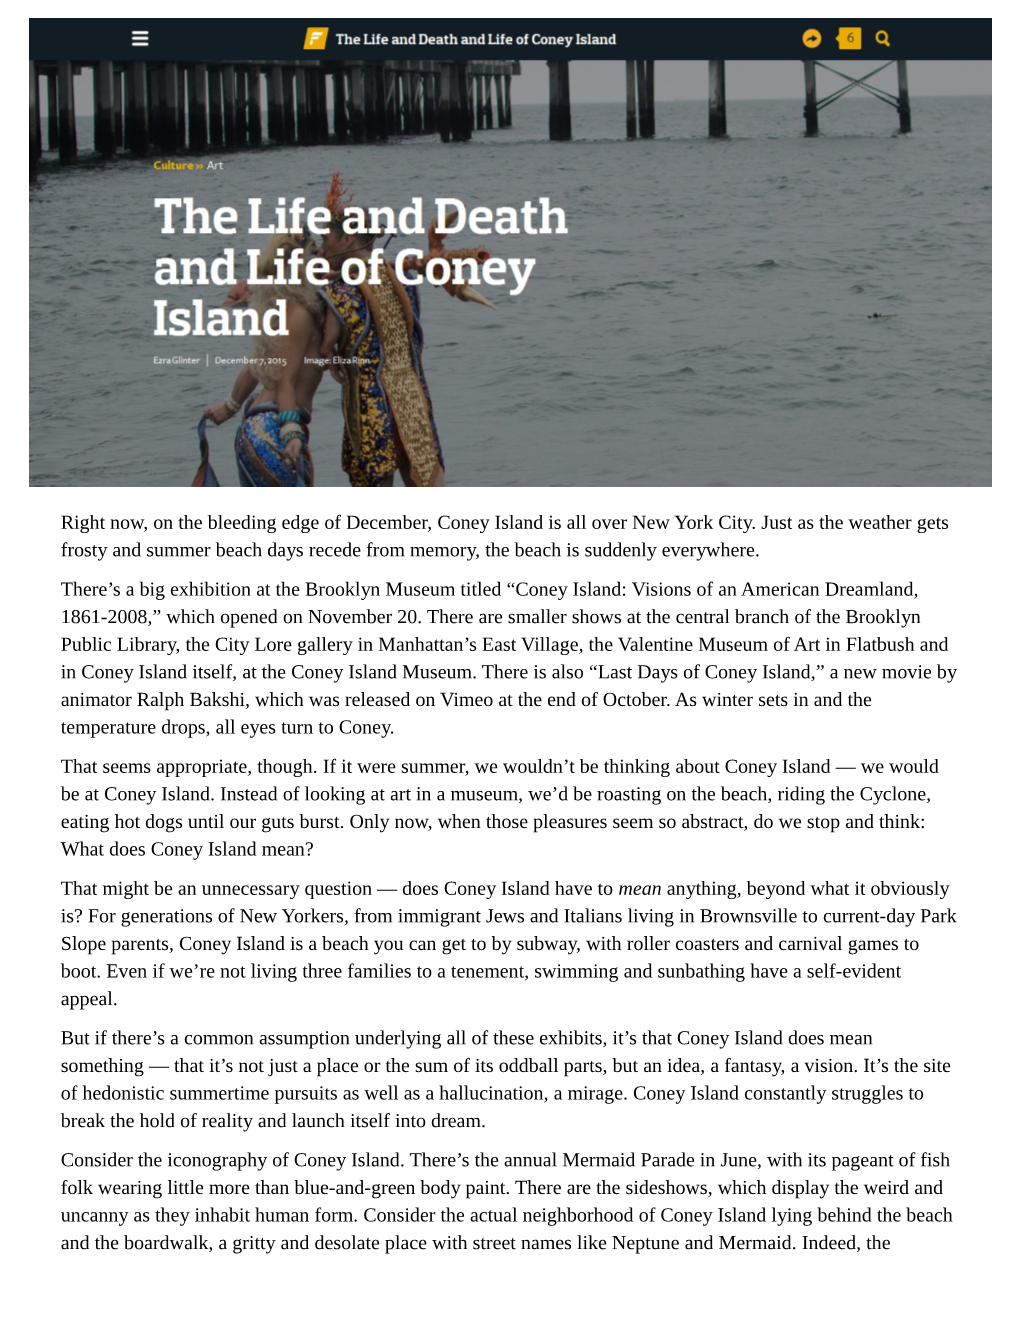 December 7, 2015, the Life and Death and Life of Coney Island